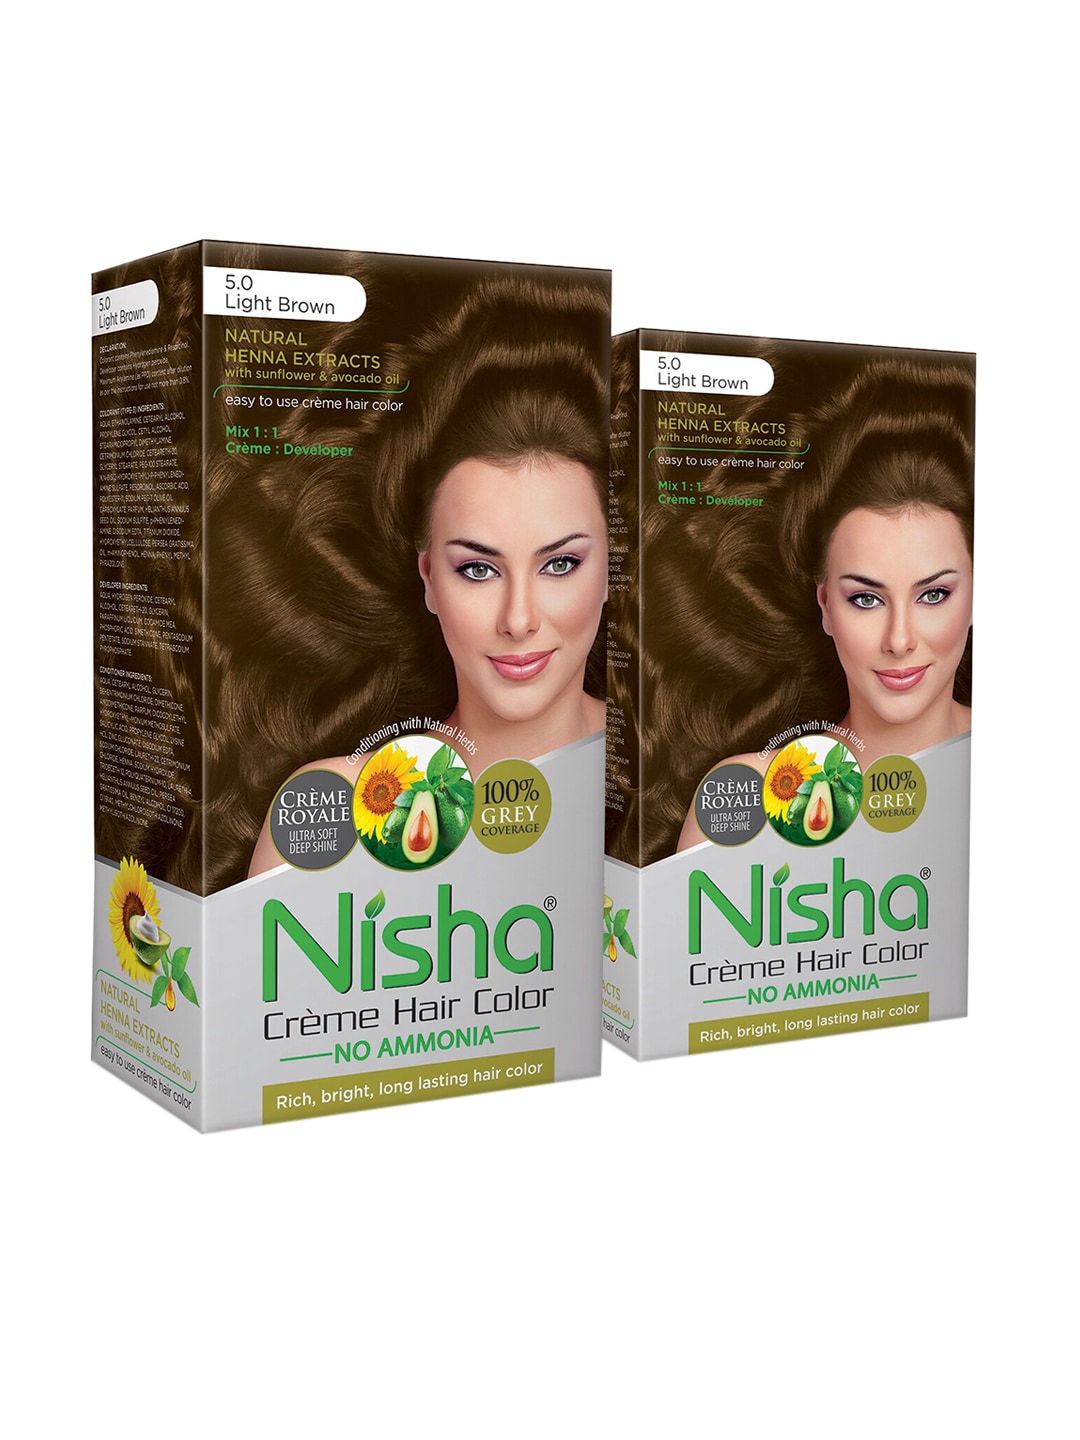 Nisha Unisex Pack of 2 Creme Hair Color 120gm each- Light Blonde Price in India